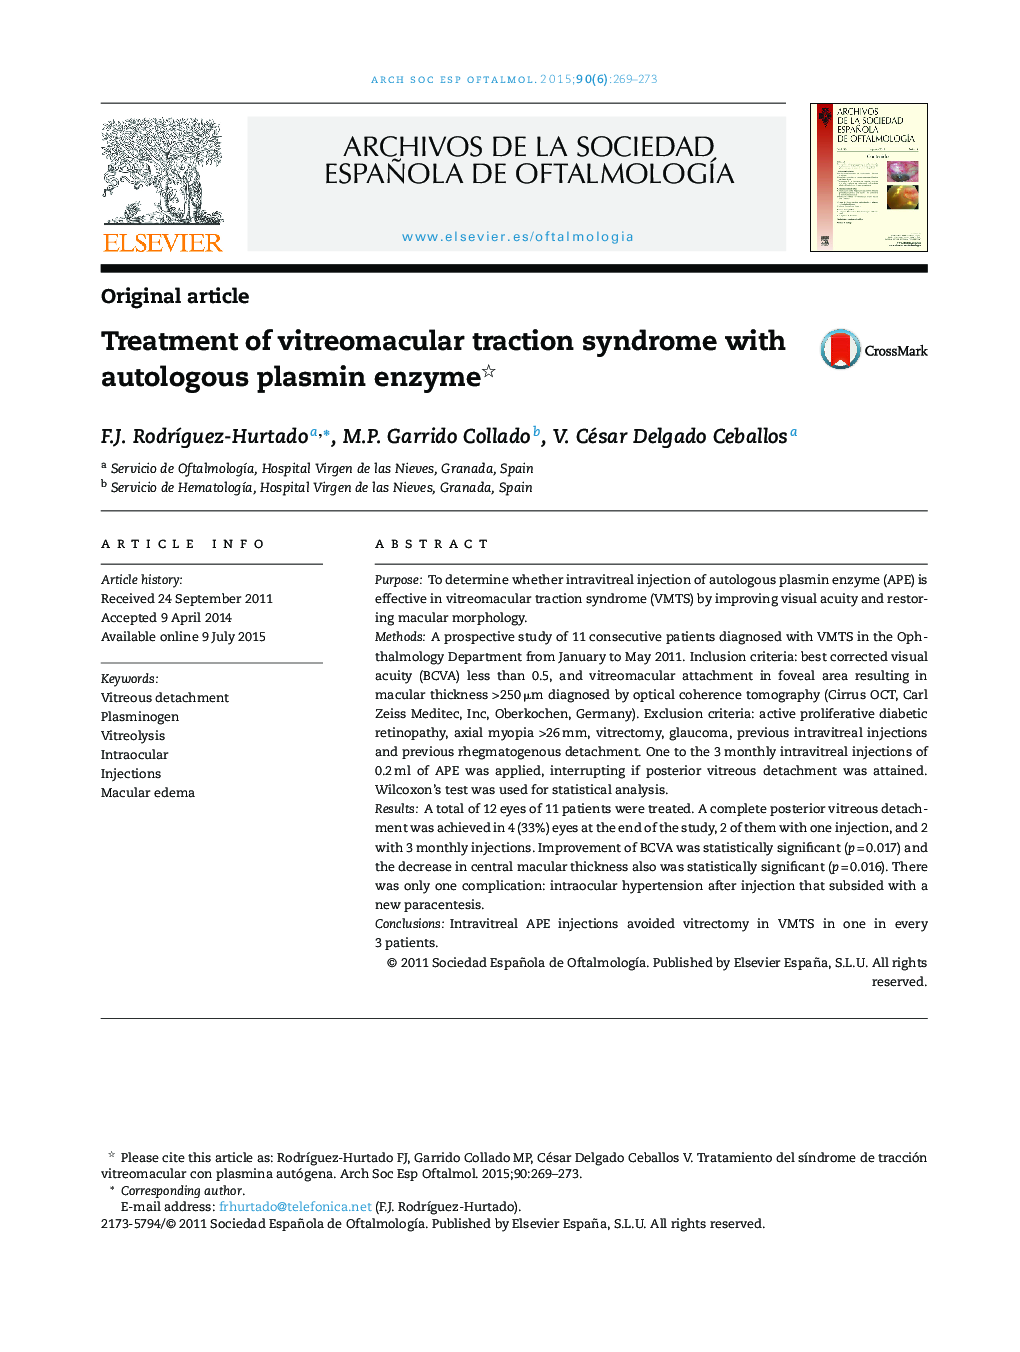 Treatment of vitreomacular traction syndrome with autologous plasmin enzyme